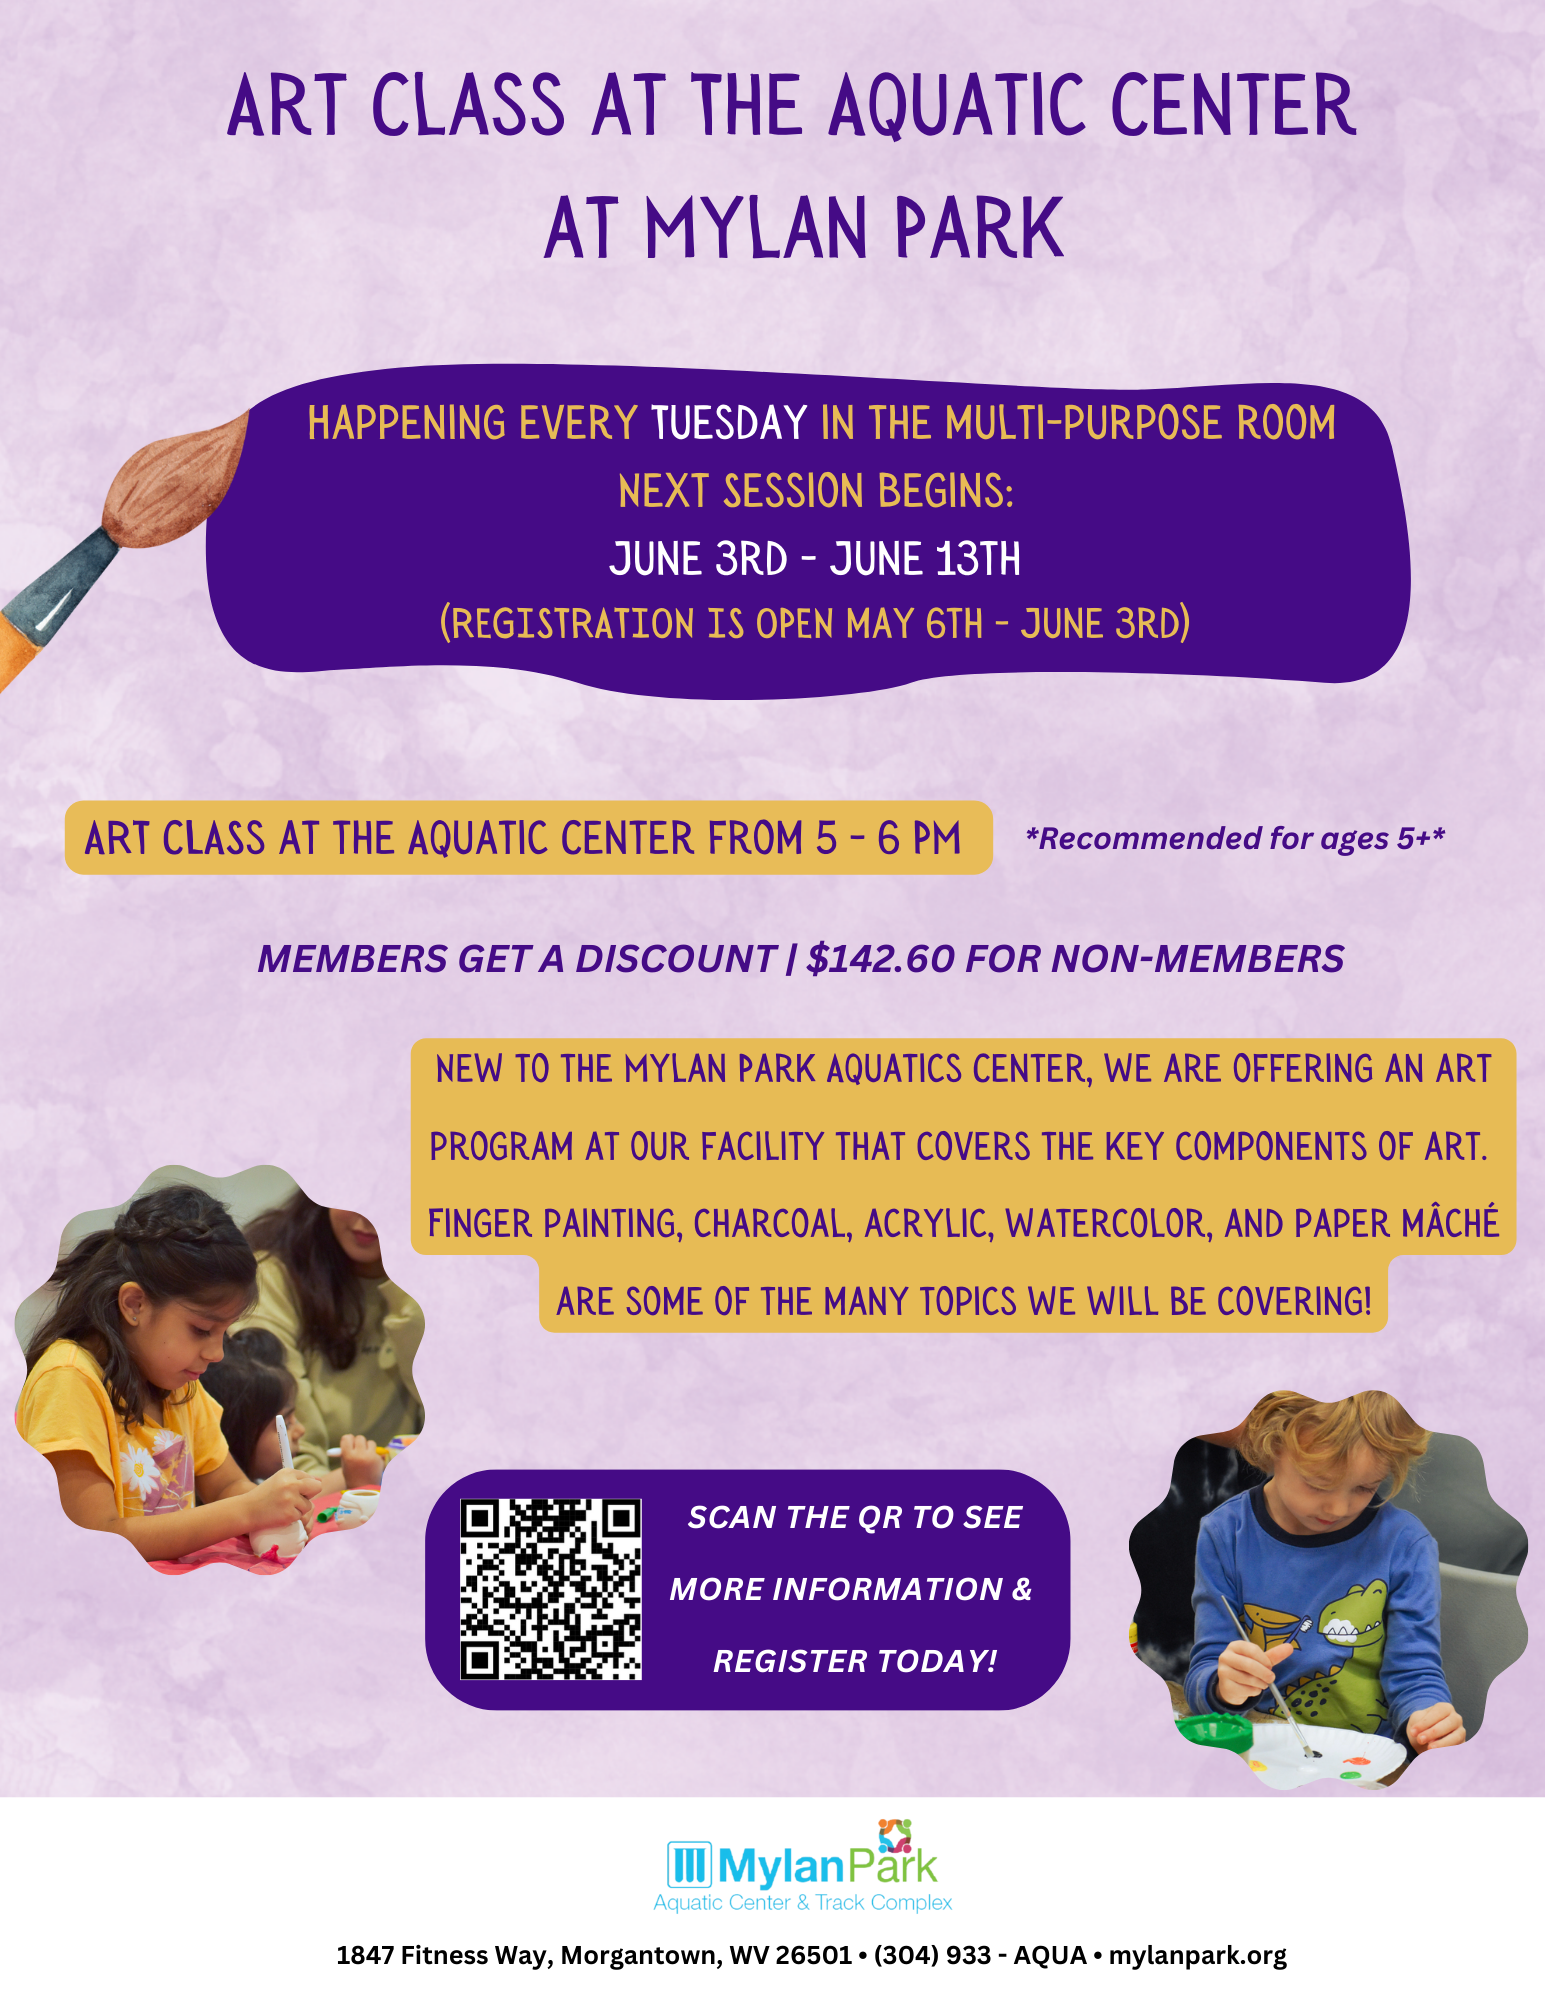 ART CLASSES at the Aquatic Center at Mylan Park June 3rd - June 13th 5 - 6 PM every Tuesday in the multi-purpose room REGISTRATION IS OPEN may 6th - June 3rd